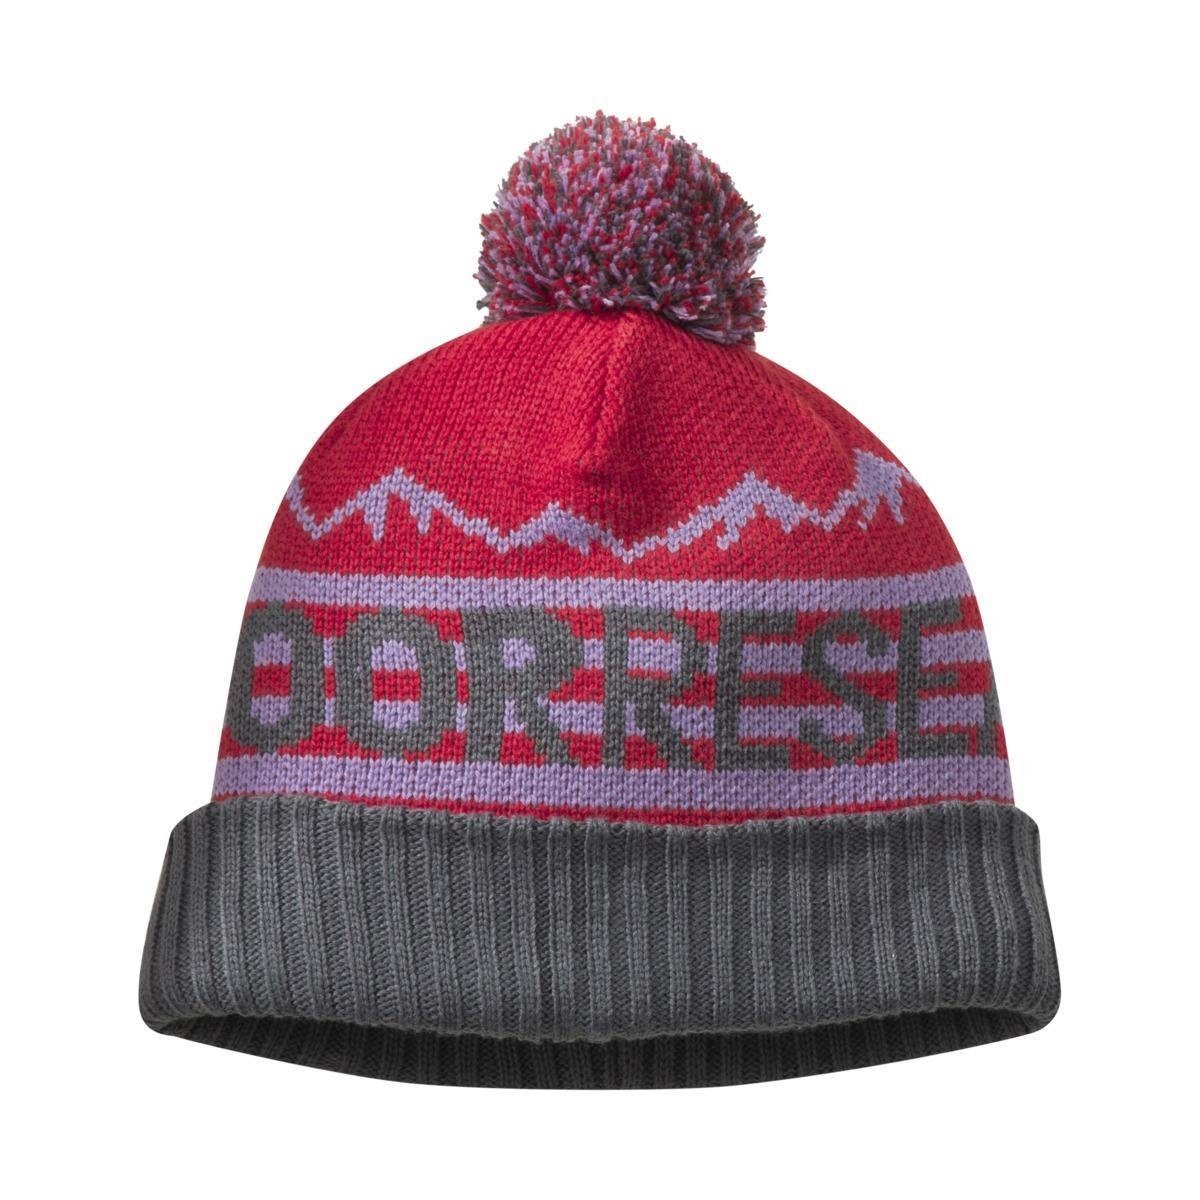 Mütze Mainstay Outdoor Outdoor Beanie Kids' Research Beanie Research